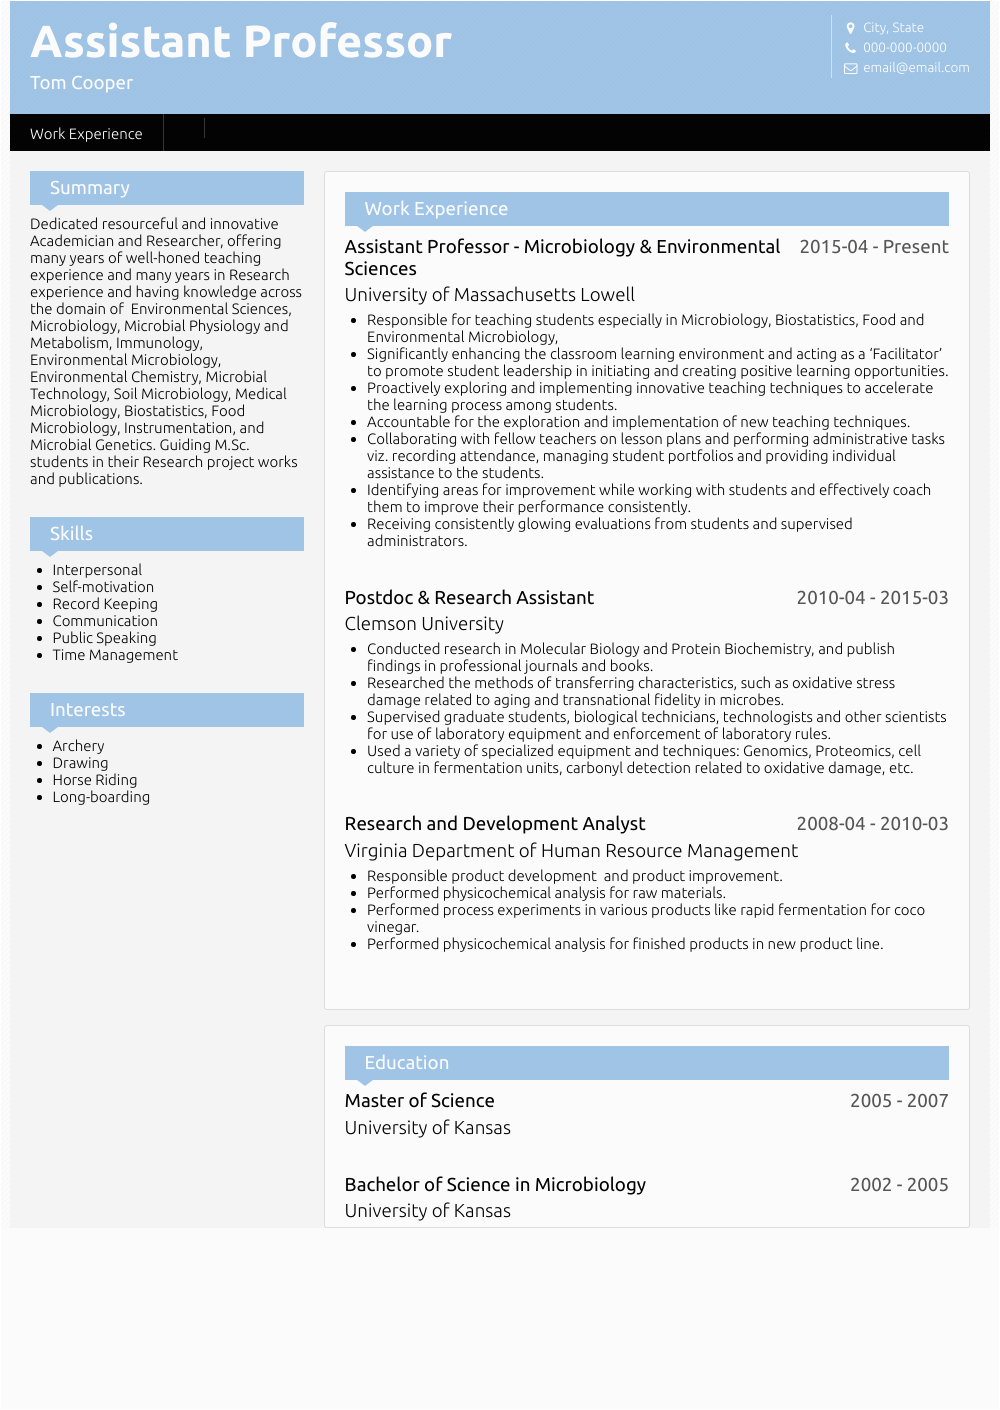 Sample Career Objective for assistant Professor Resume assistant Professor Resume Samples and Templates